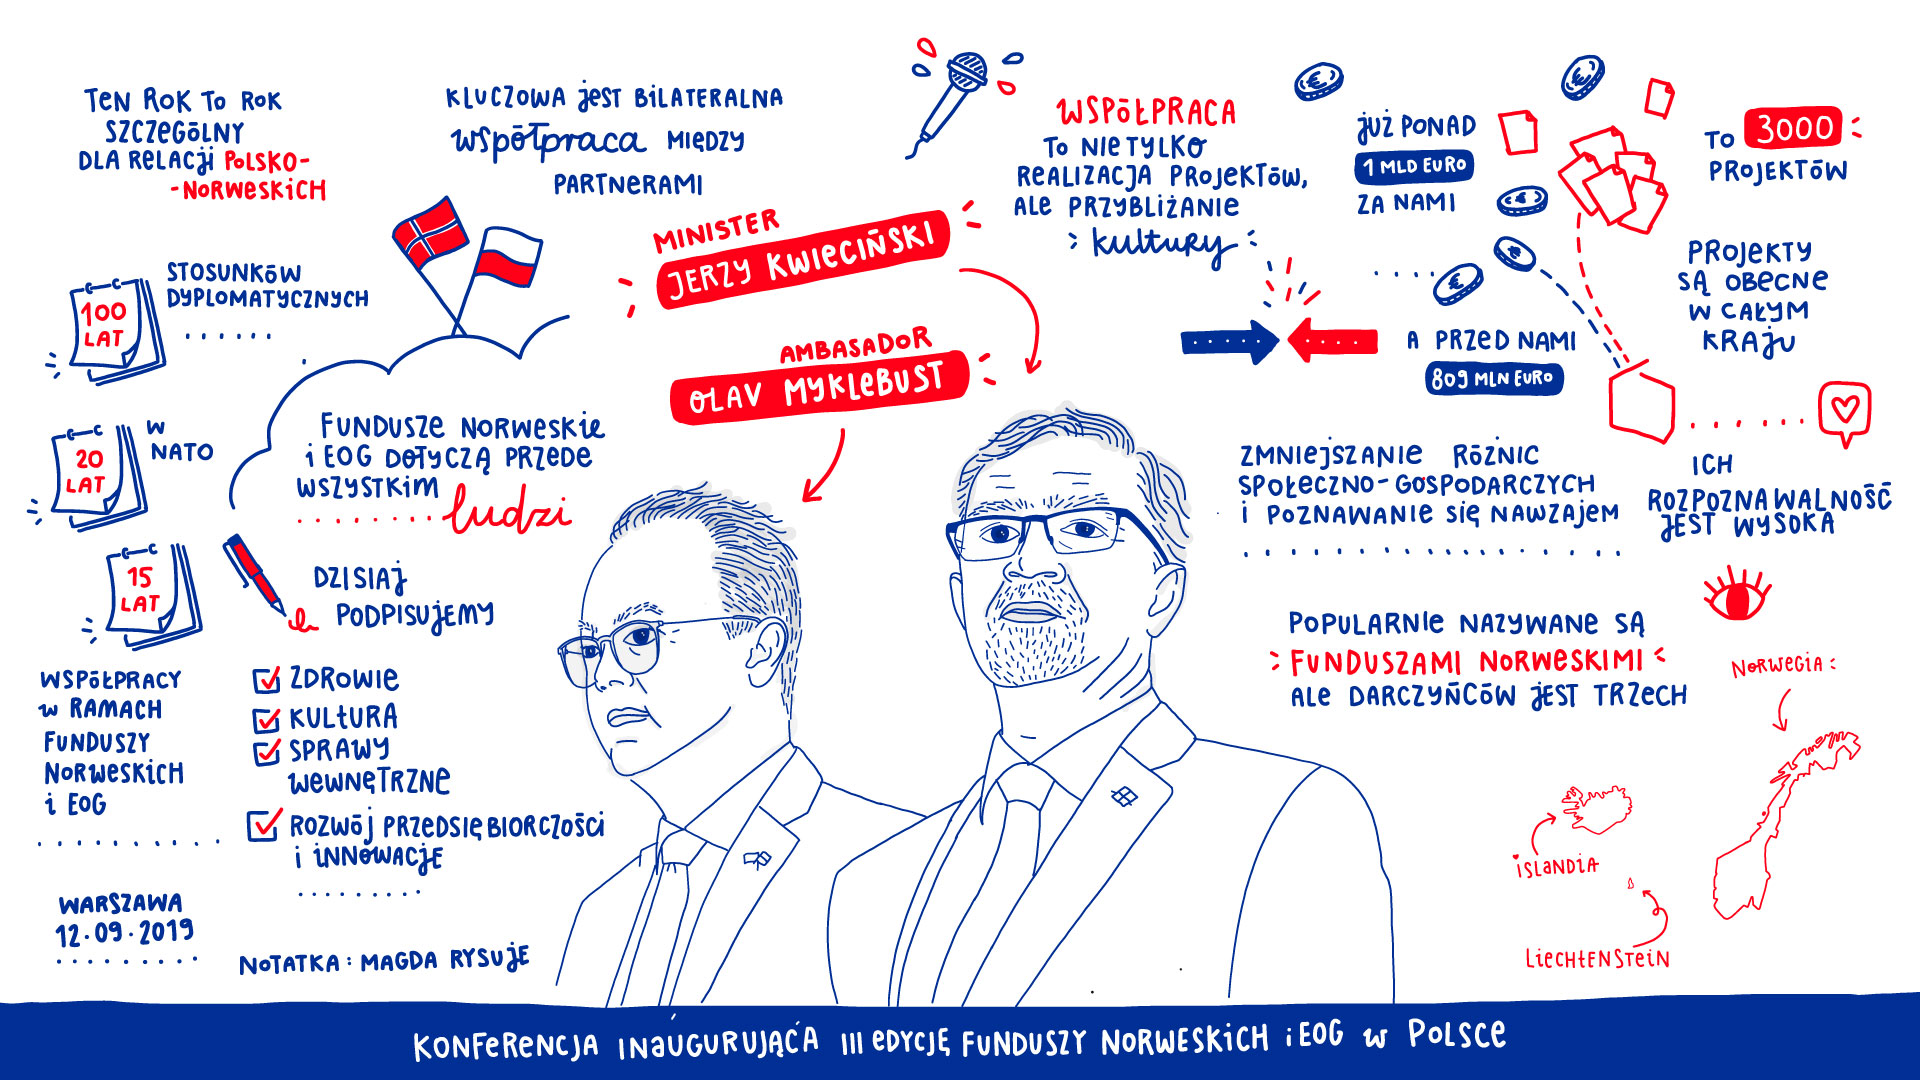 Graphic description of the speeches - Minister J. Kwieciński and Ambassador O. Myklebust